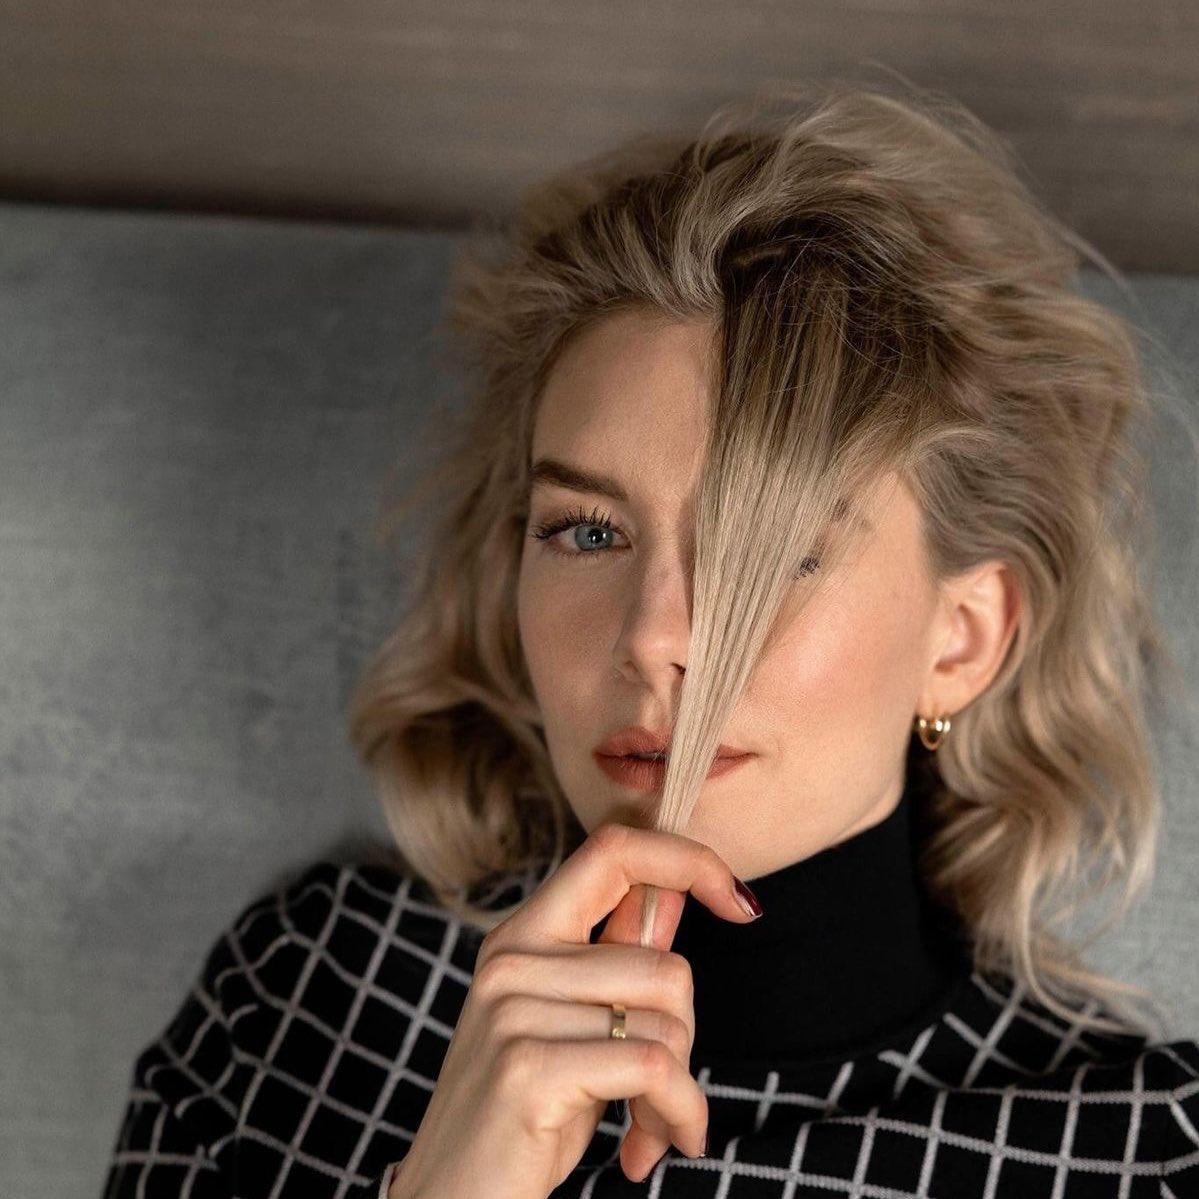 Blessing your timeline with Vanessa Kirby 😍 #VanessaKirby #FantasticFour #TheCrown #MissionImpossibleDeadReckoning #MissionImpossibleFallout #PiecesofaWoman #HobbsAndShaw #TheWorldtoCome #Napoleon #AboutTime #MrJones #MeBeforeYou #ItalianStudies #beautiful